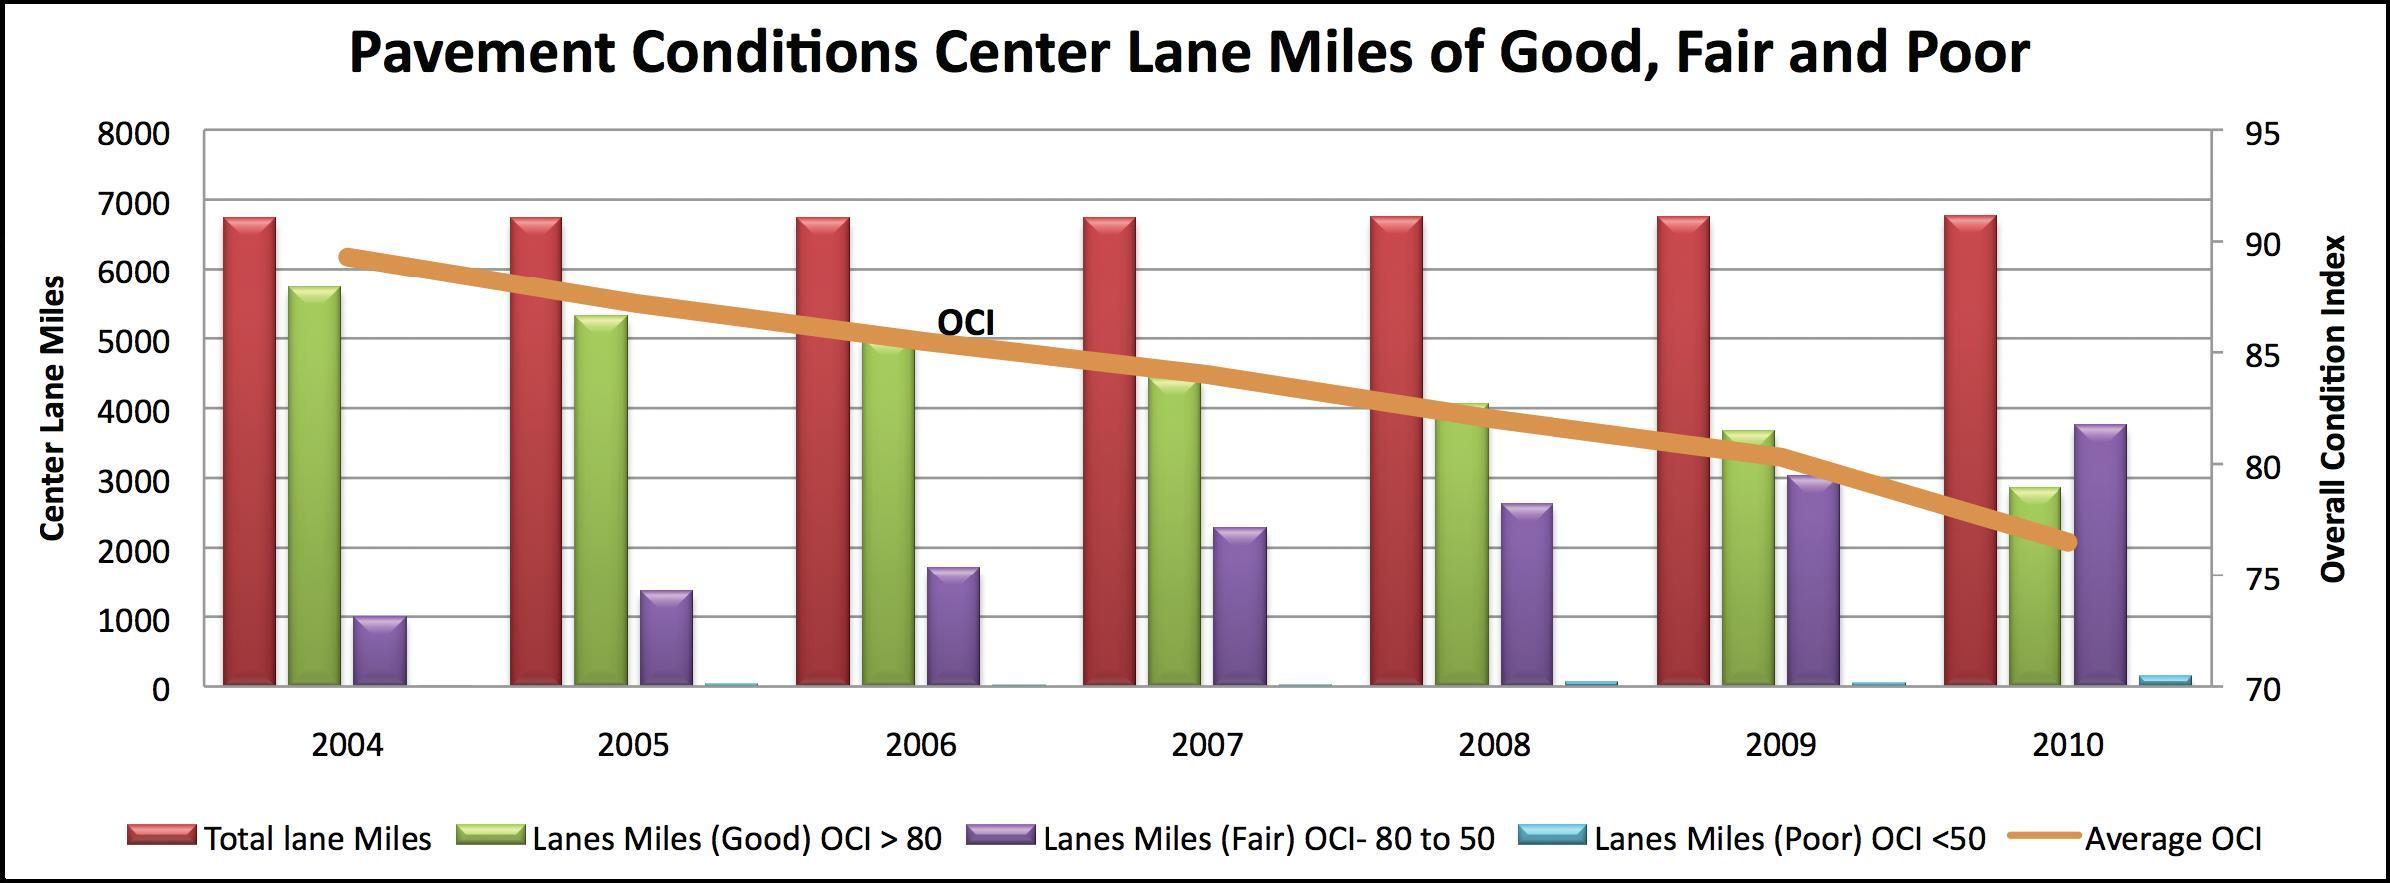 Figure 21 illustrates pavement conditions on the Utah highway network.  It has a series of four categories of measures for each year from 2004 through 2010. The four series are total lane miles, lane miles in fair conditon, lane miles in good condition and lane miles in poor condition. The Total Lane Miles changes little over the period consistently being at about 6000 lane miles.  The Percent of lane miles in good condition gradually decreases from about 5800 miles in 2004 steadily falling to fewer than 3000 miles in 2010.  Concurrently, the number of the lane miles in fair condition increases from approximately 500 to more than 3800 by 2010. The miles of poor pavement remains very low throughout the period and are so small they are barely visible as a vertical bar. The chart also has a trendline depicting the Overall Condition Index.  It falls from slightly more than 90 in 2004 to about 75 in 2010.